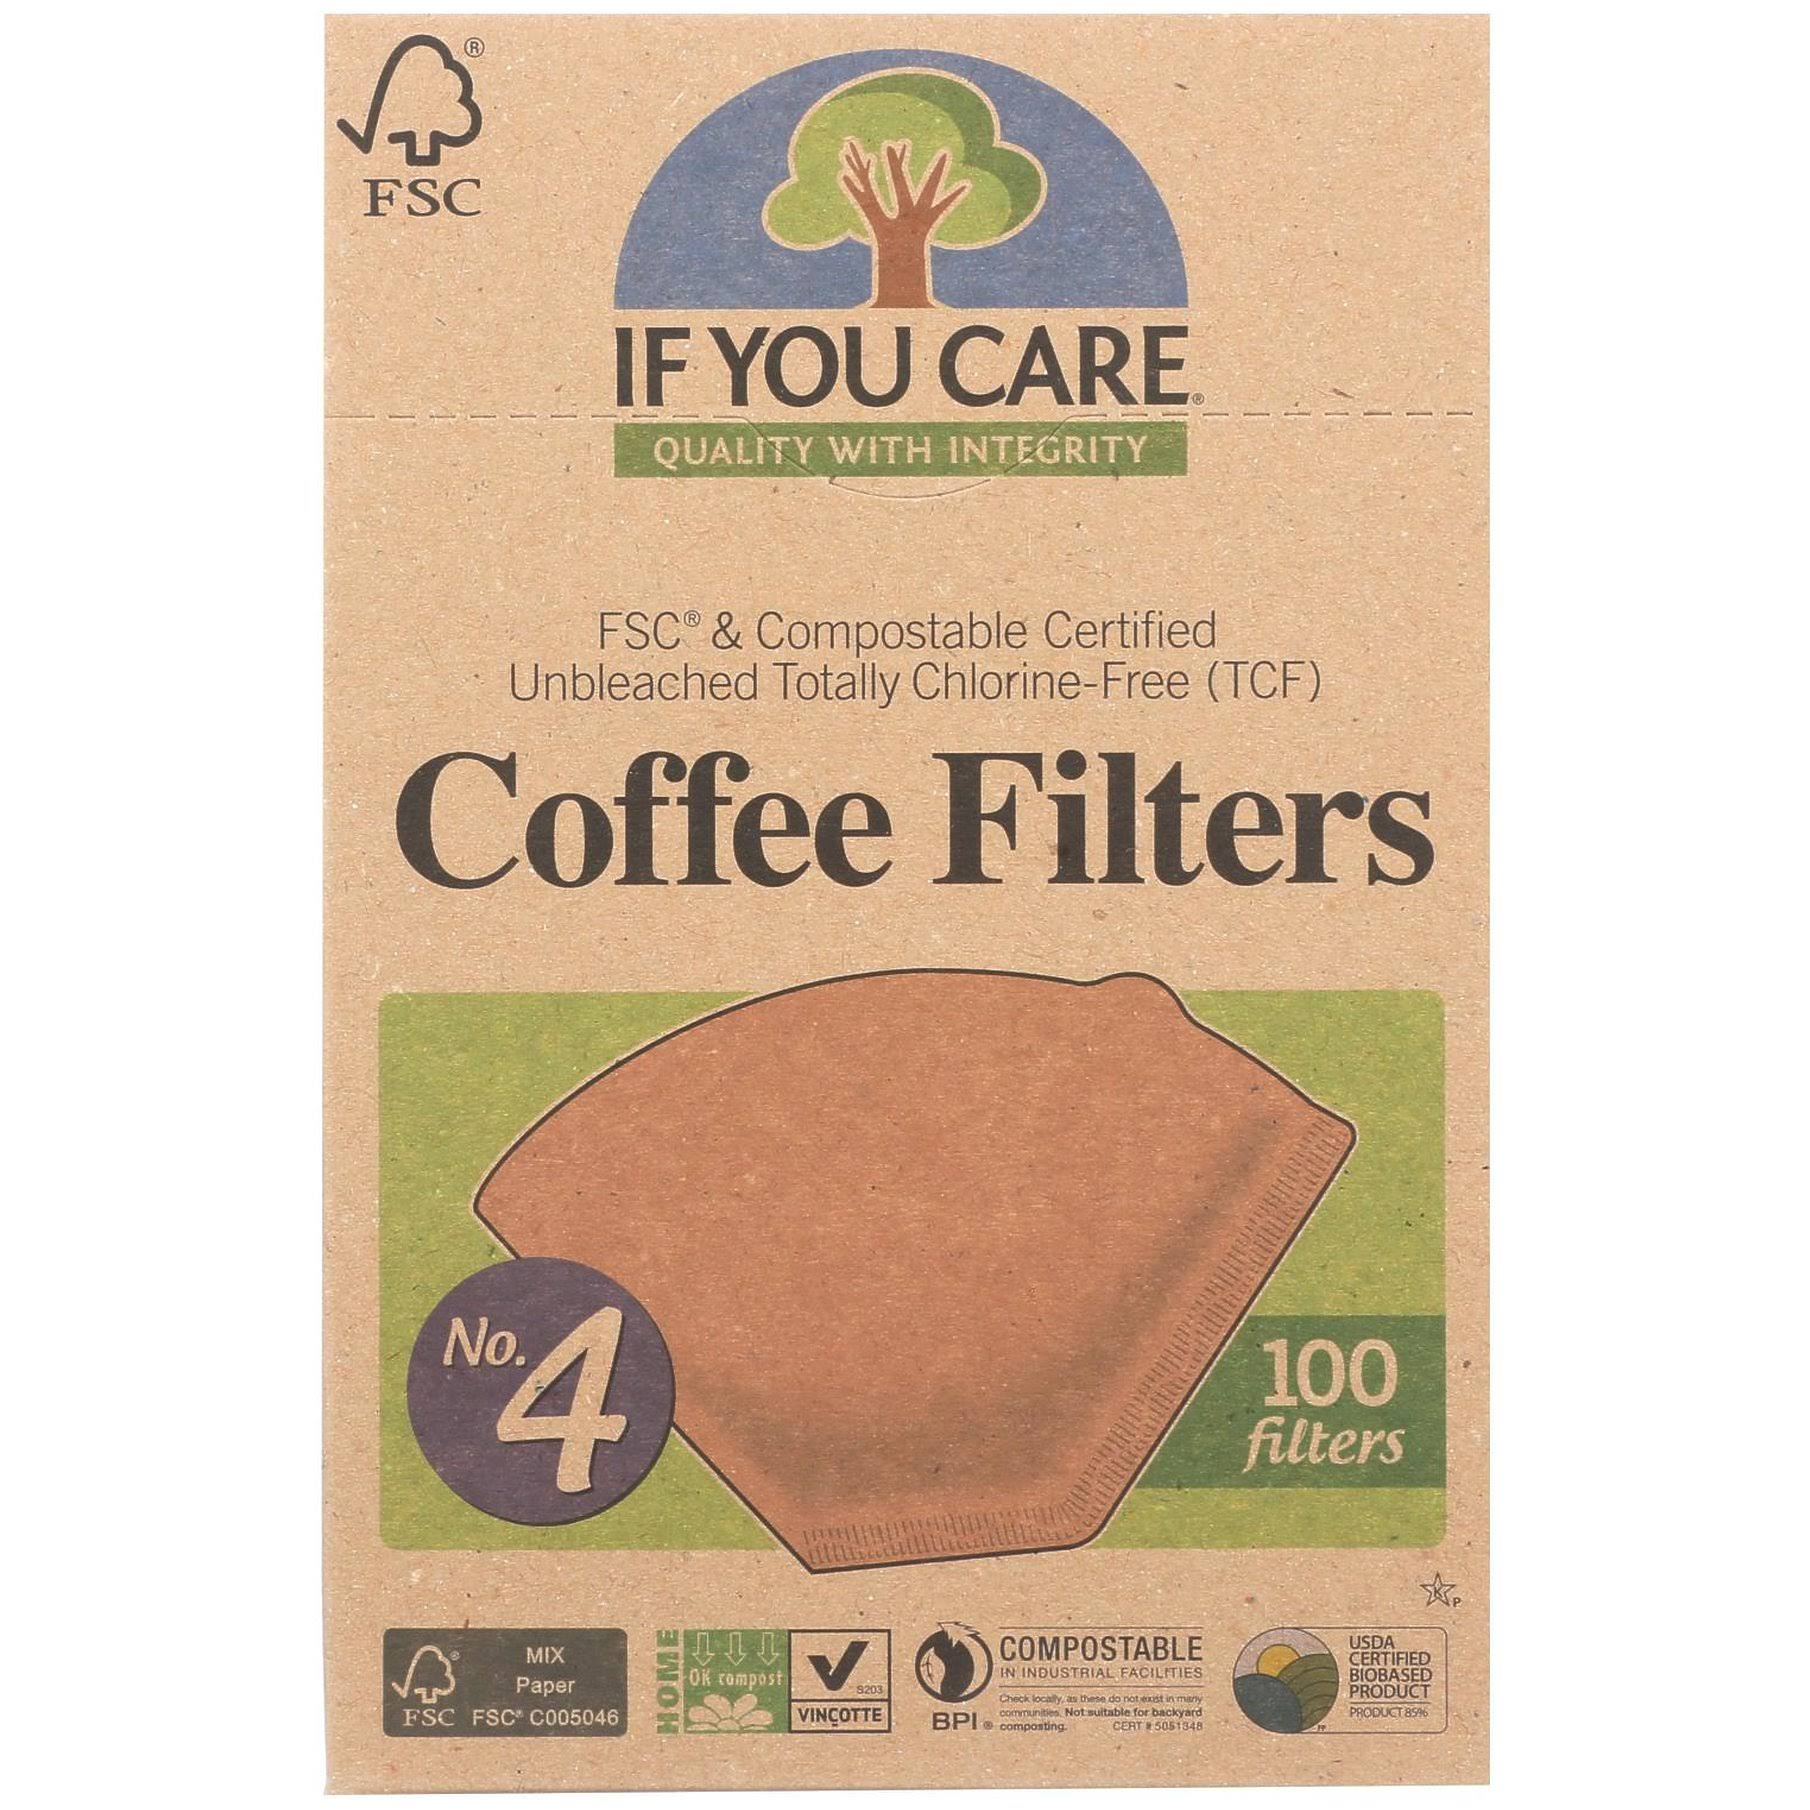 If You Care Coffee Filters - 100 Filters